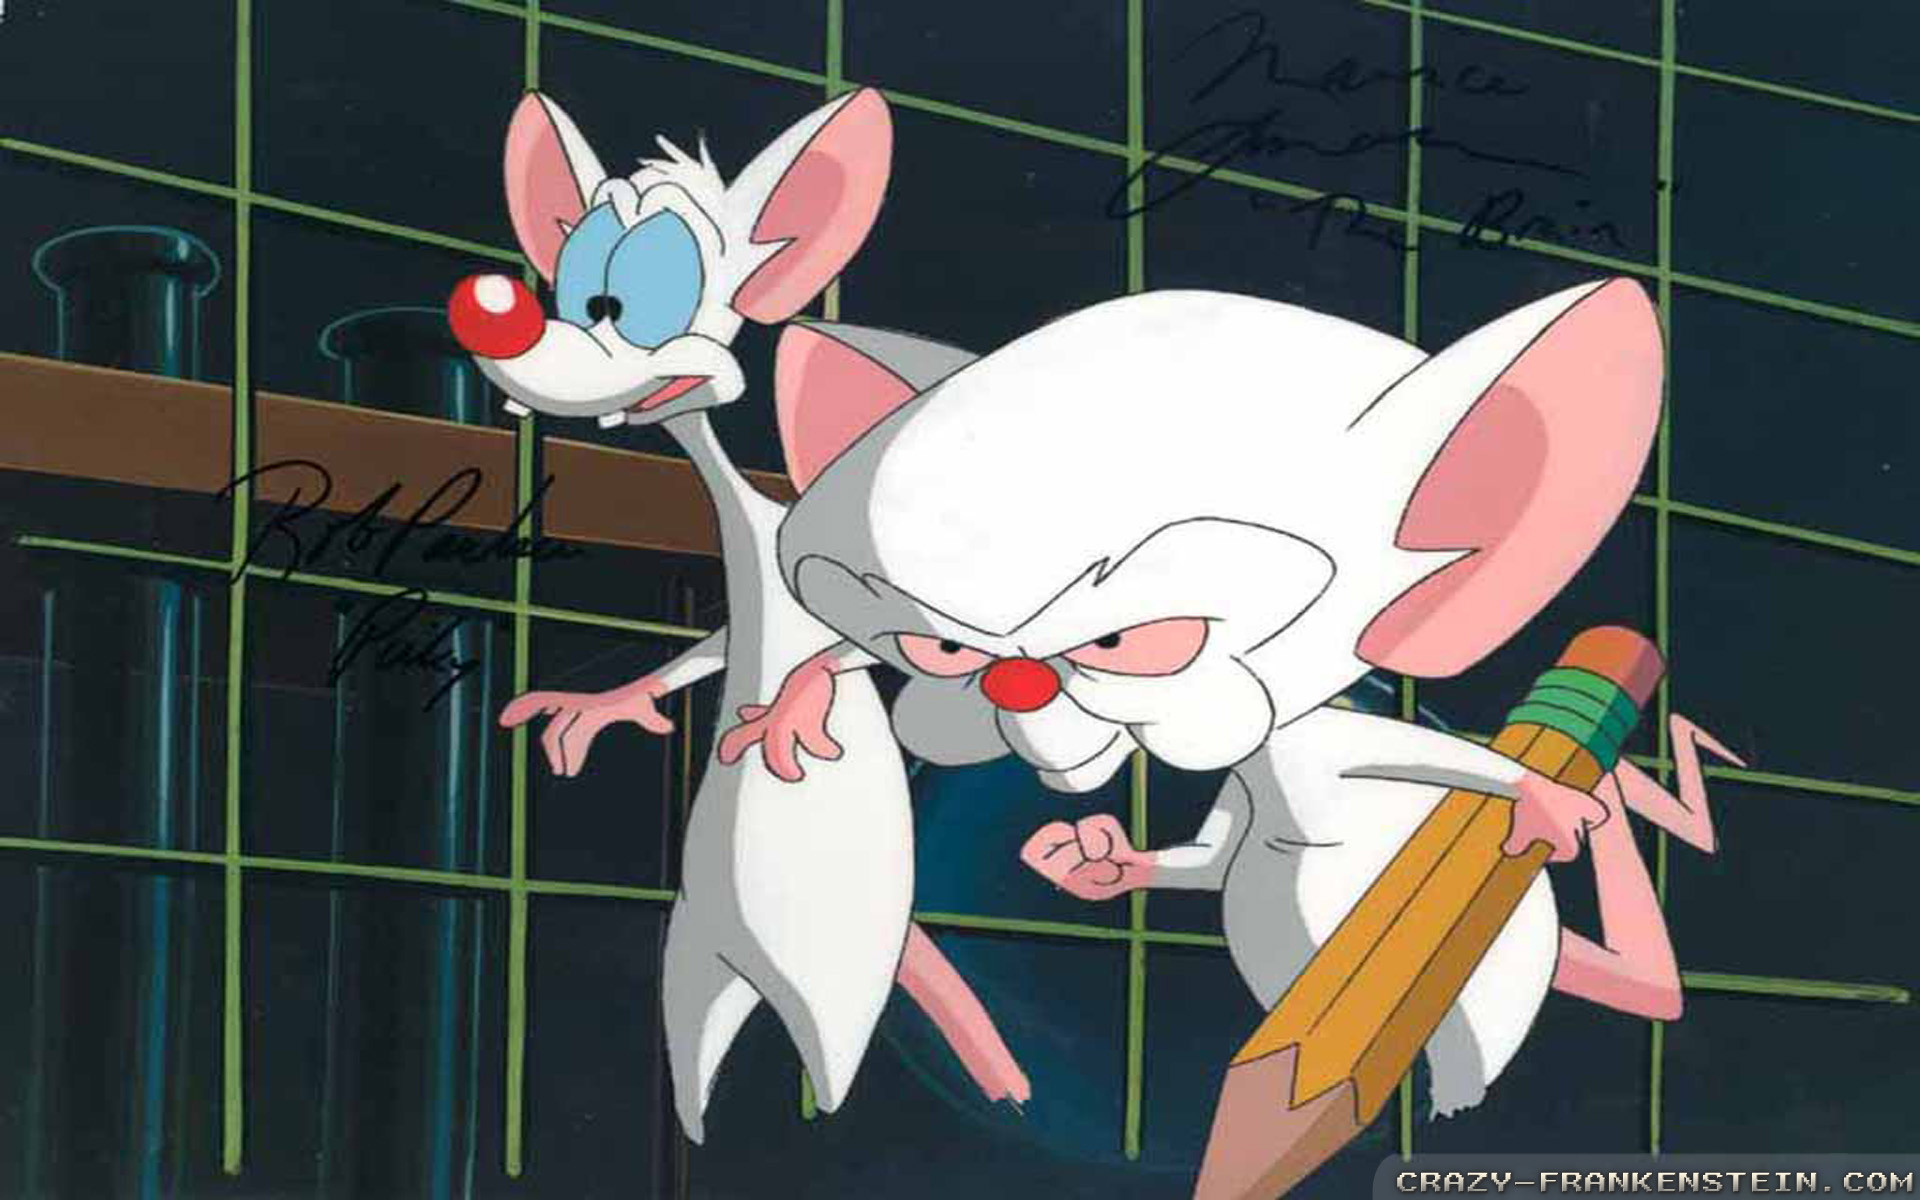 1920x1200 Wallpaper: Pinky and the Brain Resolution: 1024x768 | 1280x1024 |  1600x1200. Widescreen Res: 1440x900 | 1680x1050 | 